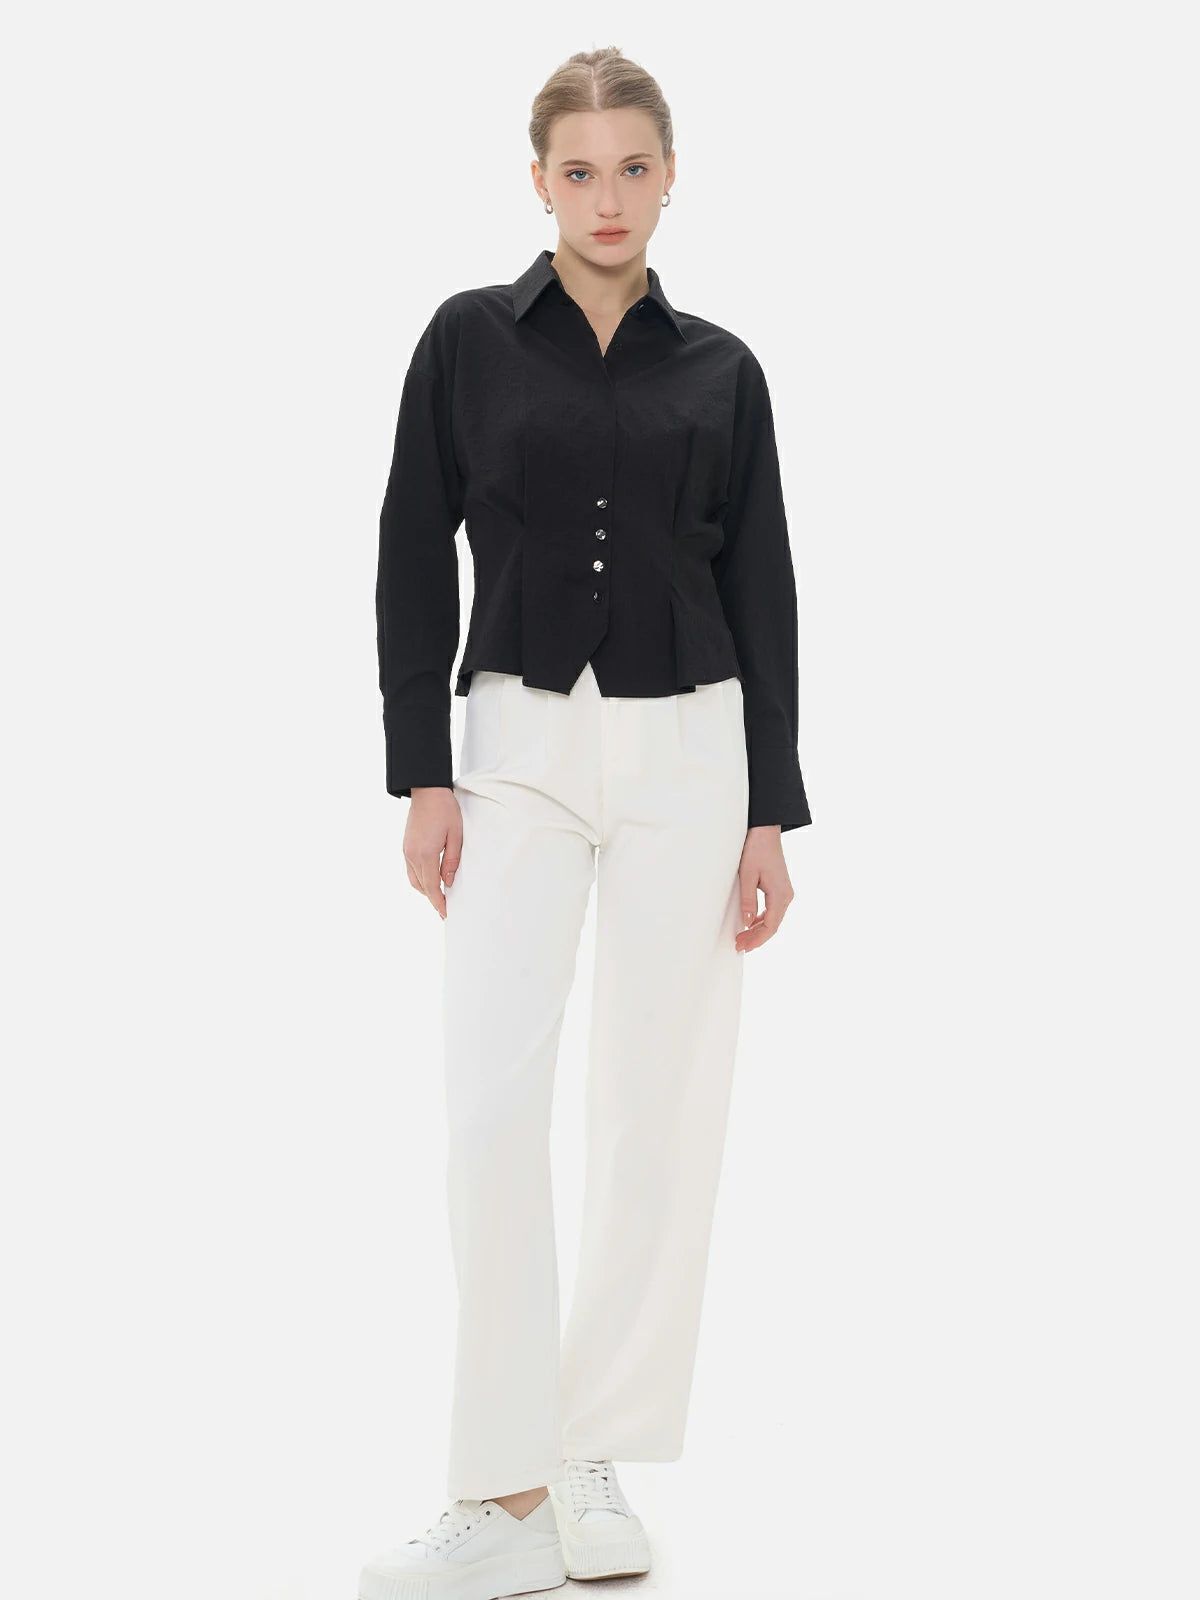 Elegant and refined women&#39;s shirt with a textured surface and cinched waist